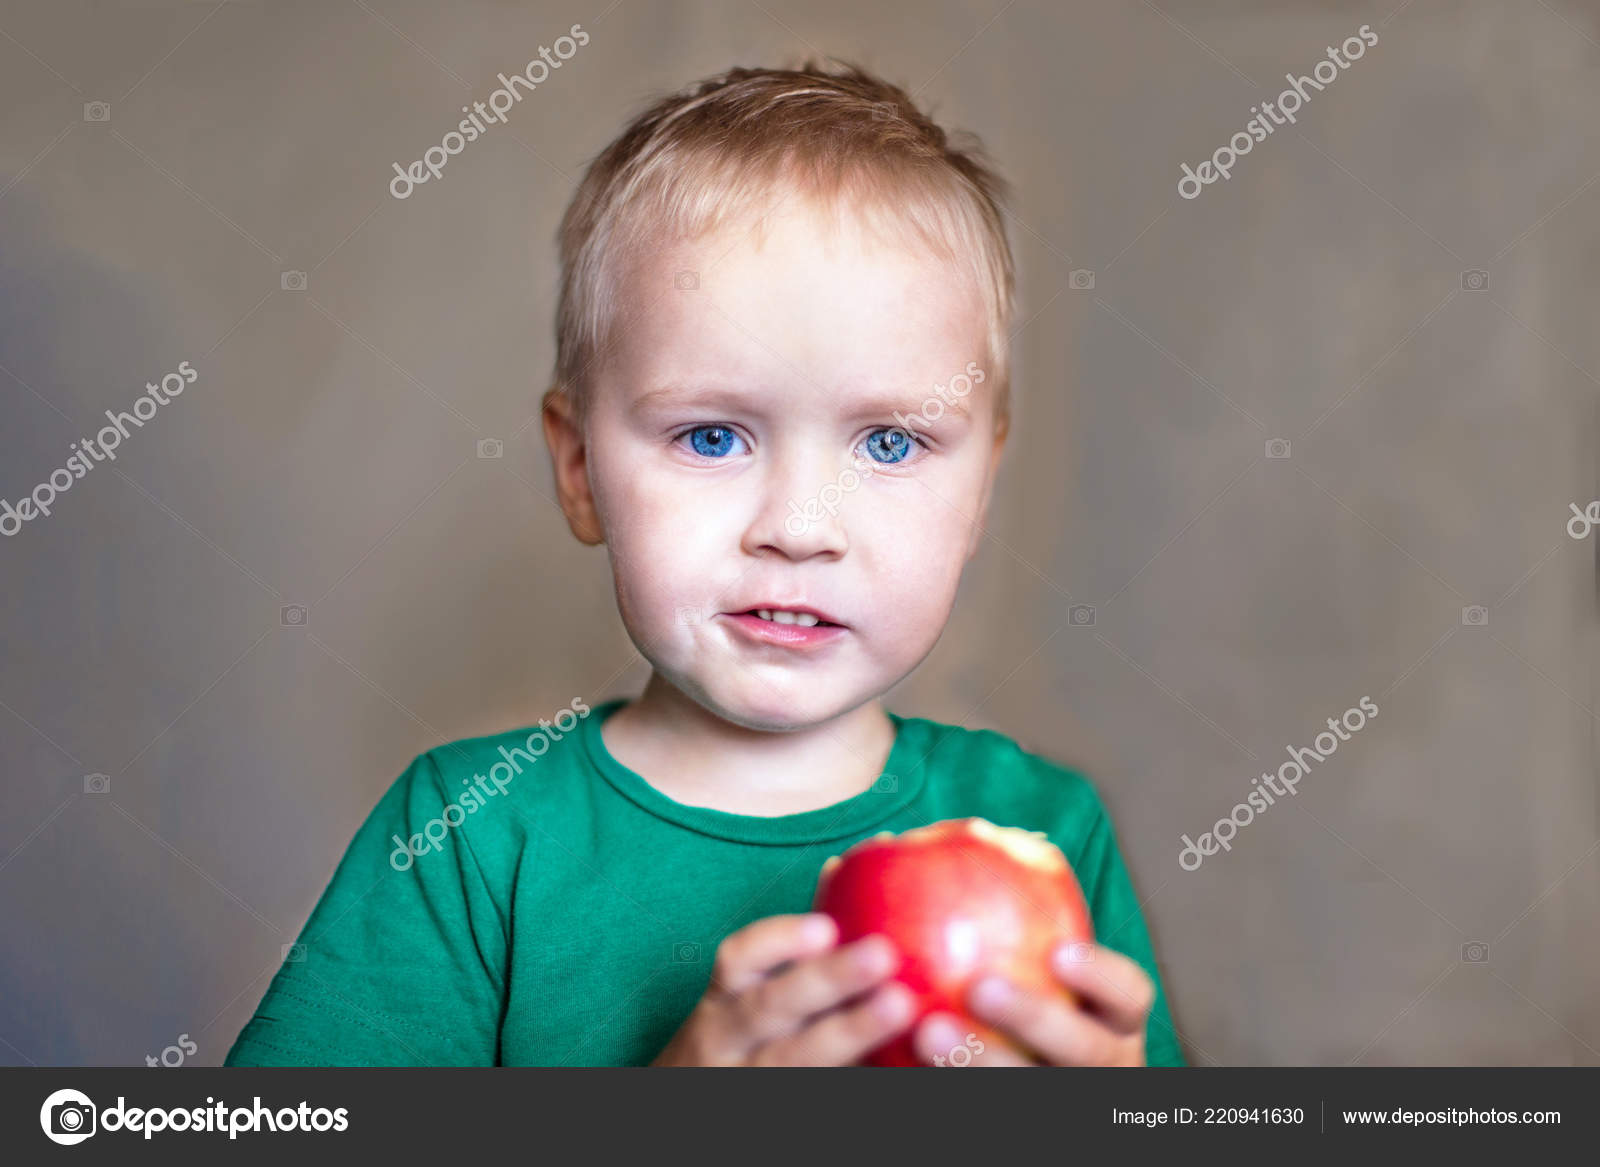 Boy With Blonde Hair And Green Eyes Cute Caucasian Little Boy